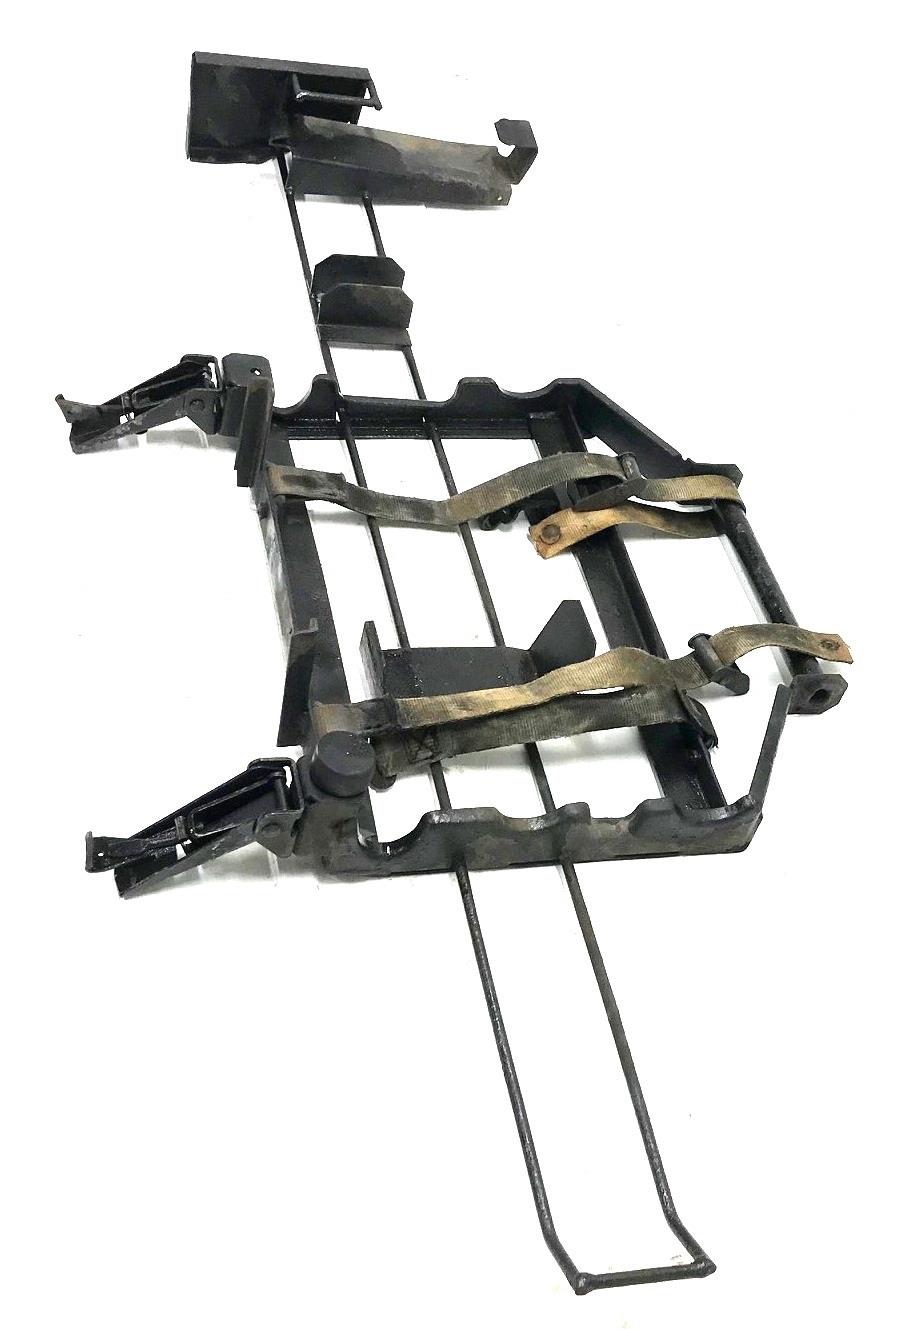 HM-1330 | HM-1330  Pioneer Stowage Tool Tray  Rack with Straight Mounting Clamps Assembly With BII Kit HMMWV (15).jpg